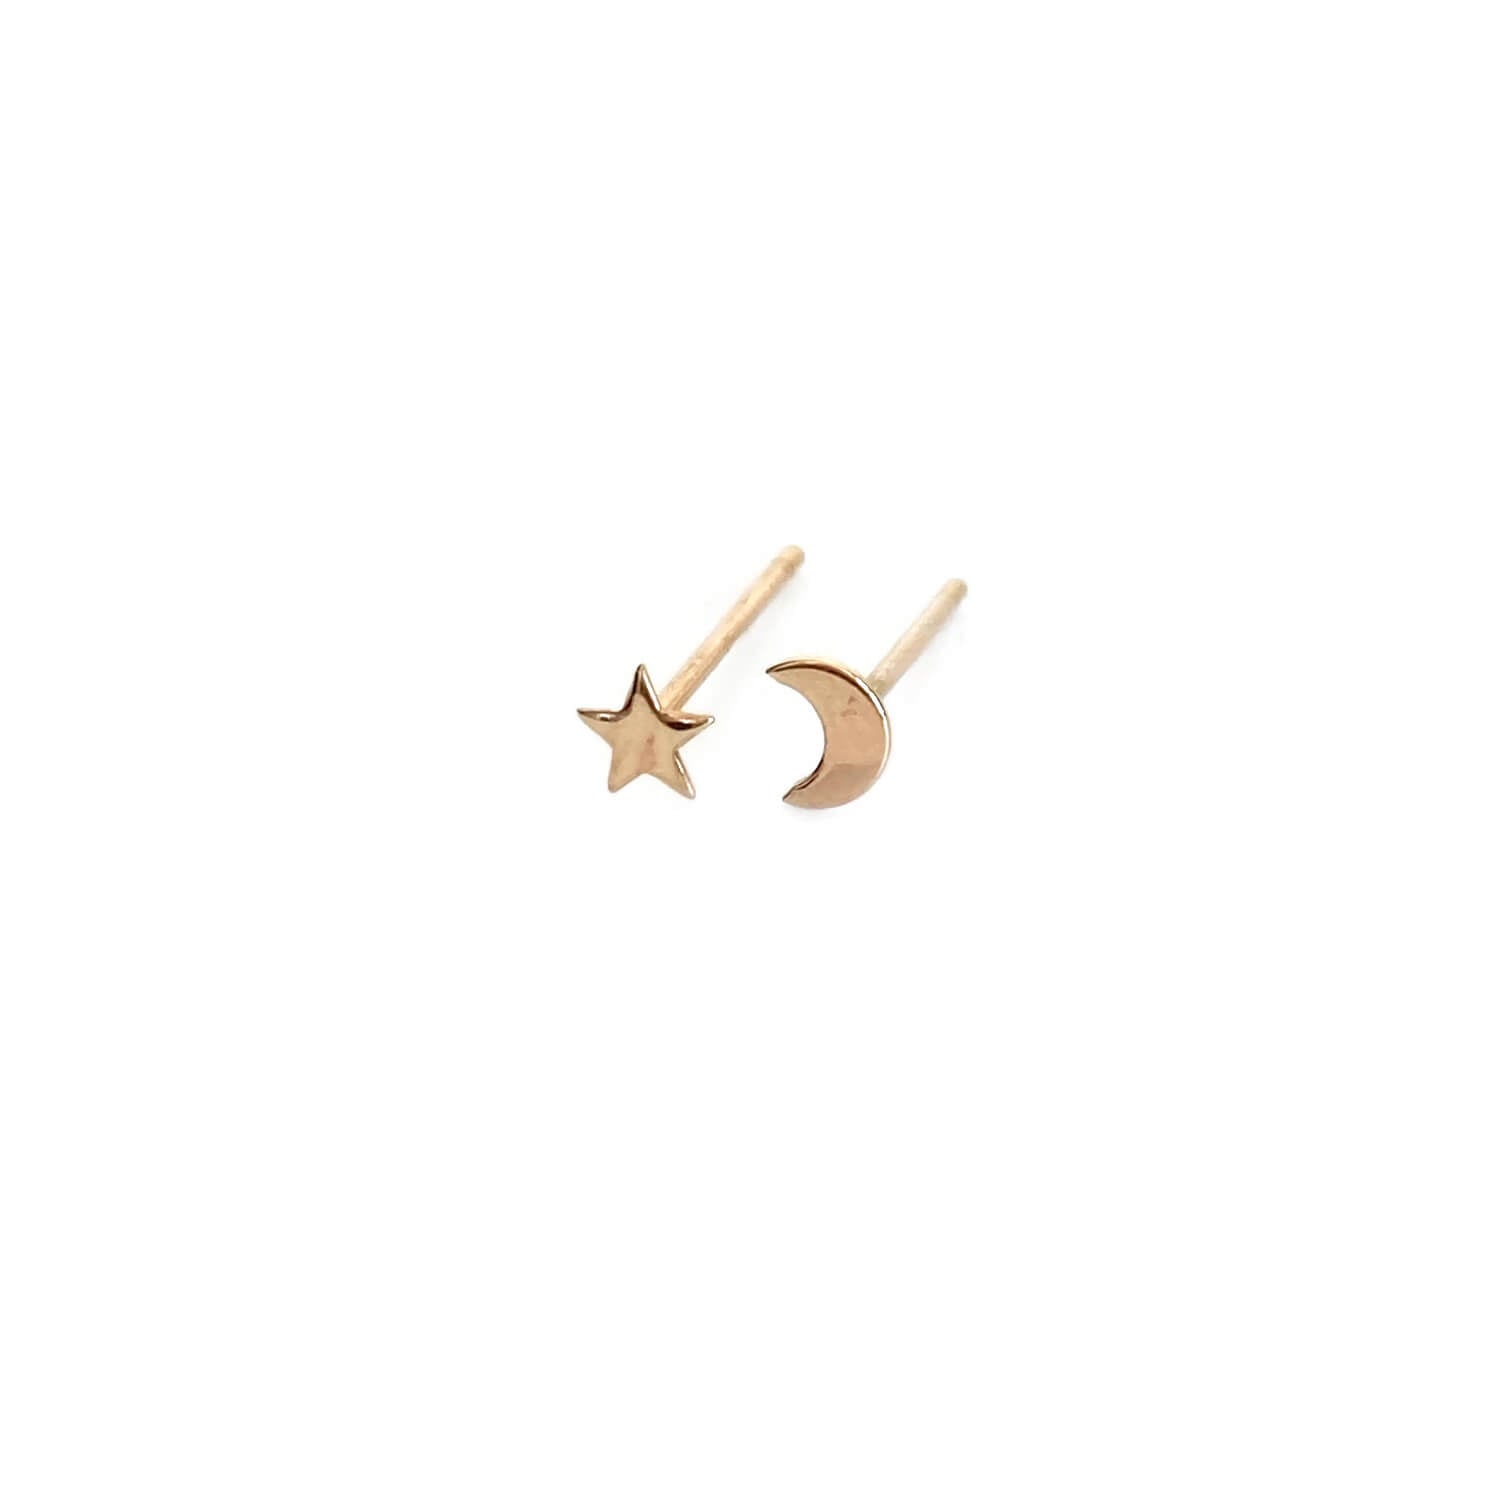 Crescent moon and star stud earrings are made of 14k solid gold.  This mismatched moon and star stud earrings are dainty and small.  You can layer them with other gold stud earrings if you have two piercings ear lobe